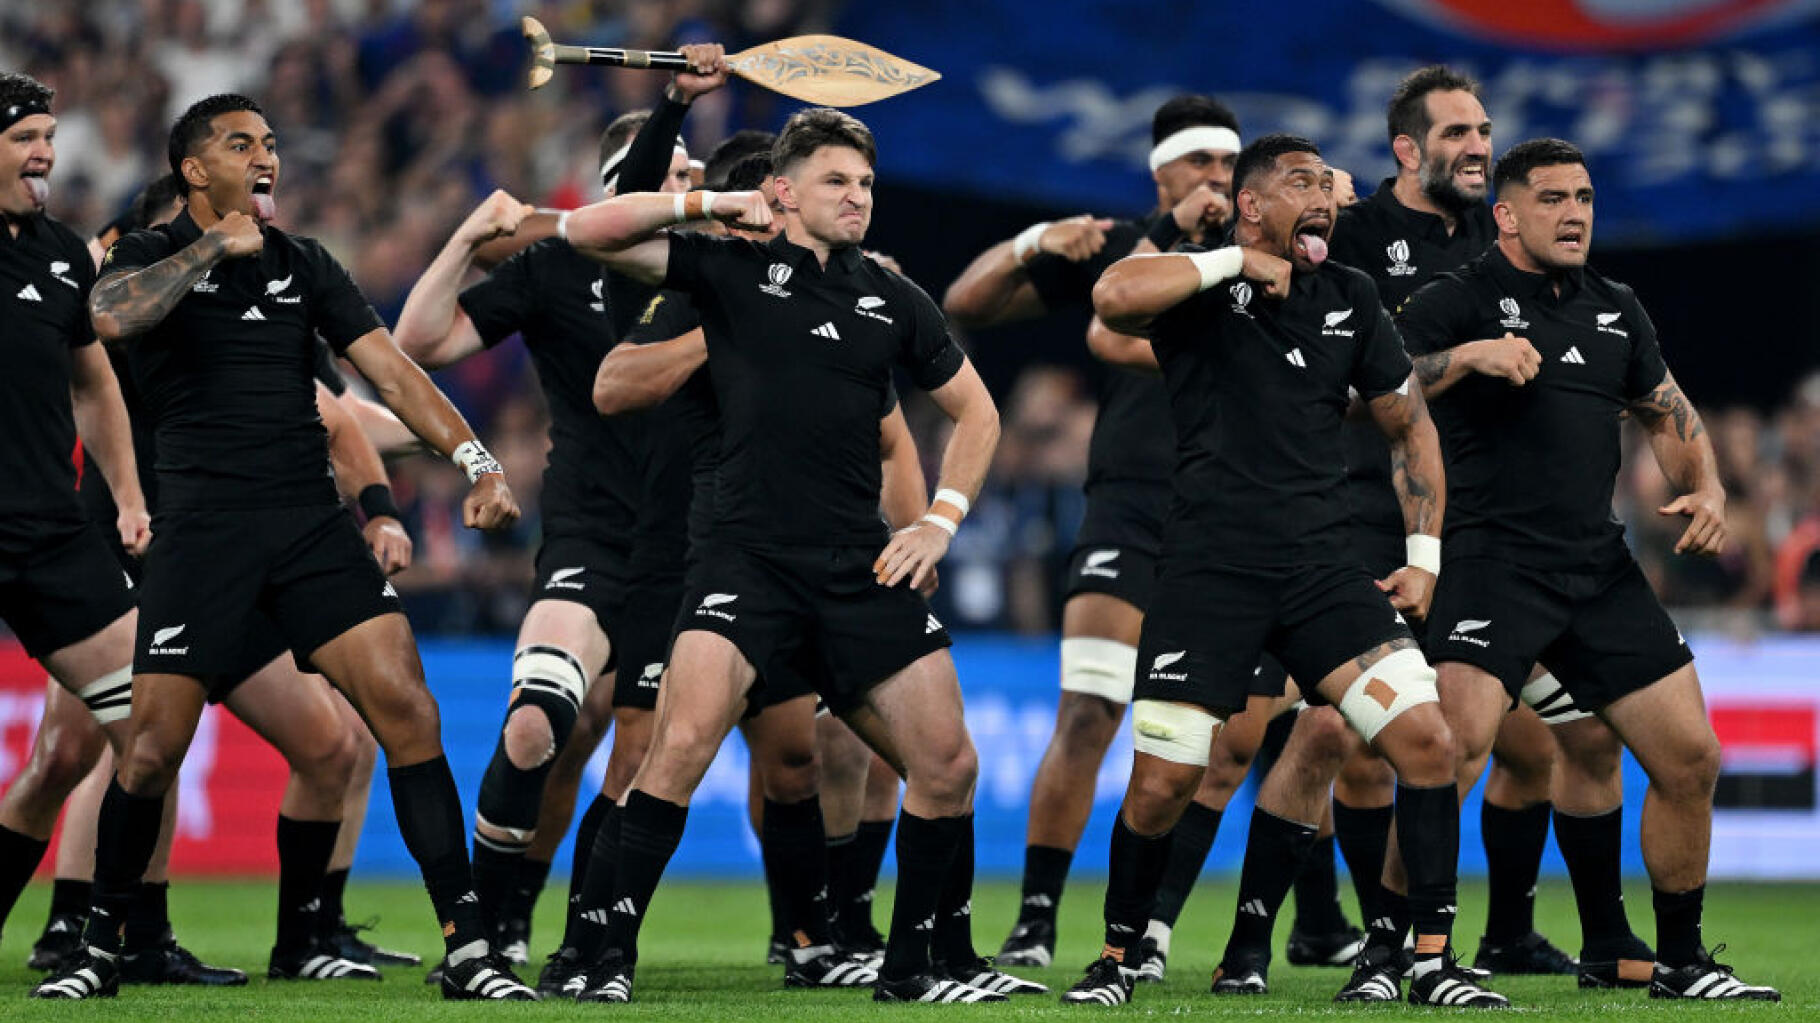 The All Blacks move this car blocking their bus in France with their bare hands